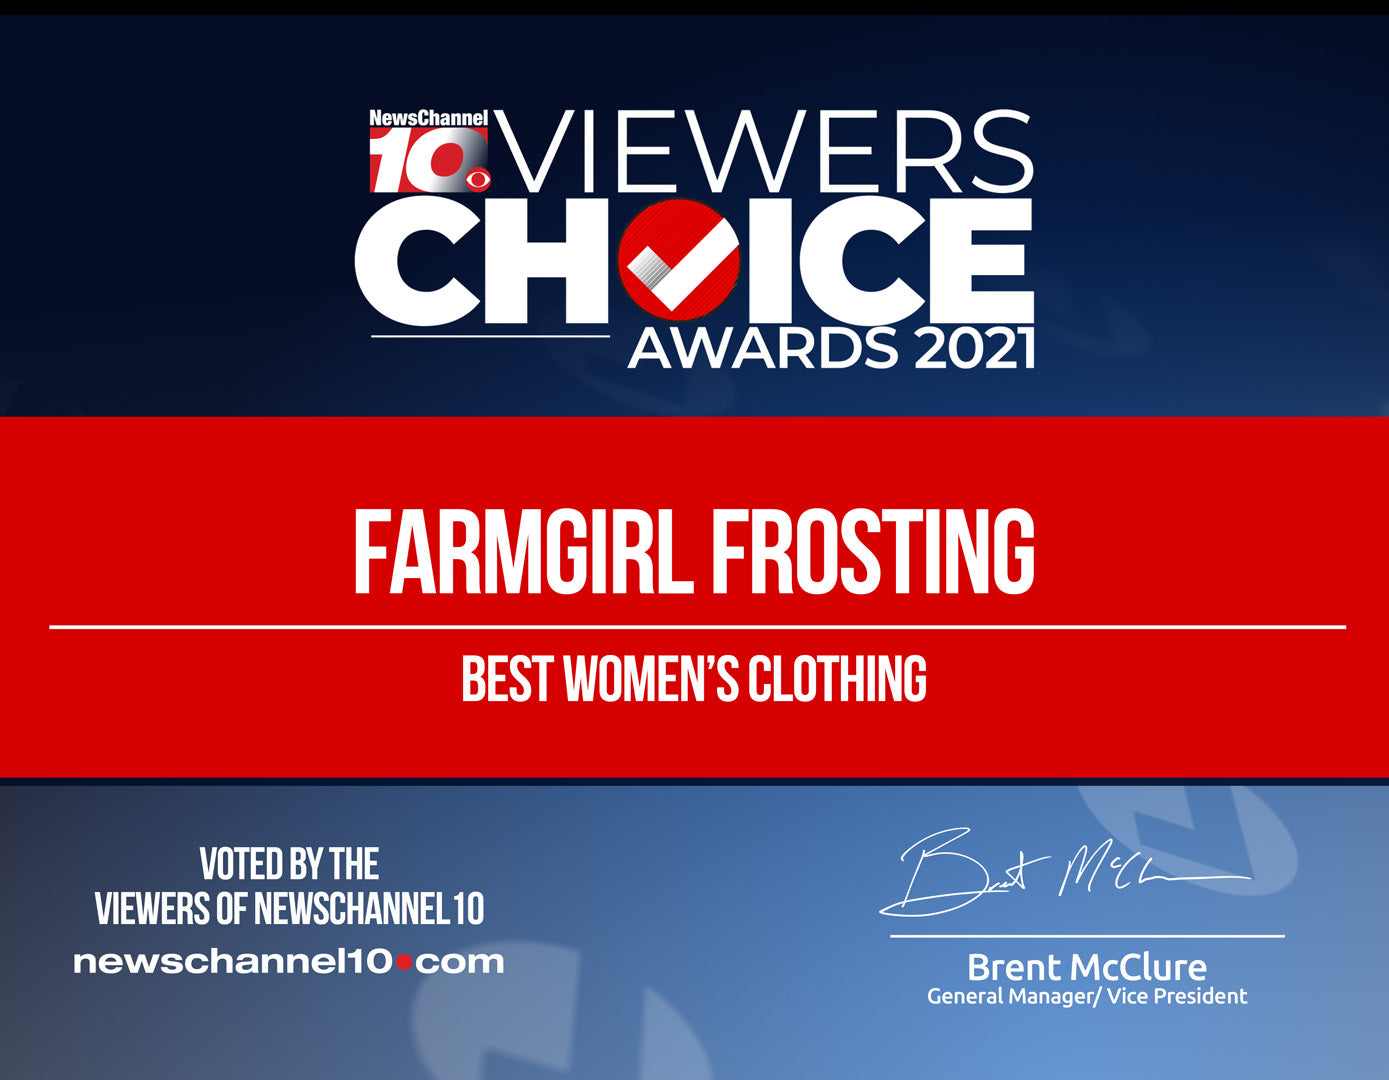 image: 2021 Best Women's Clothing - Amarillo News Channel 10 Viewers Choice Awards